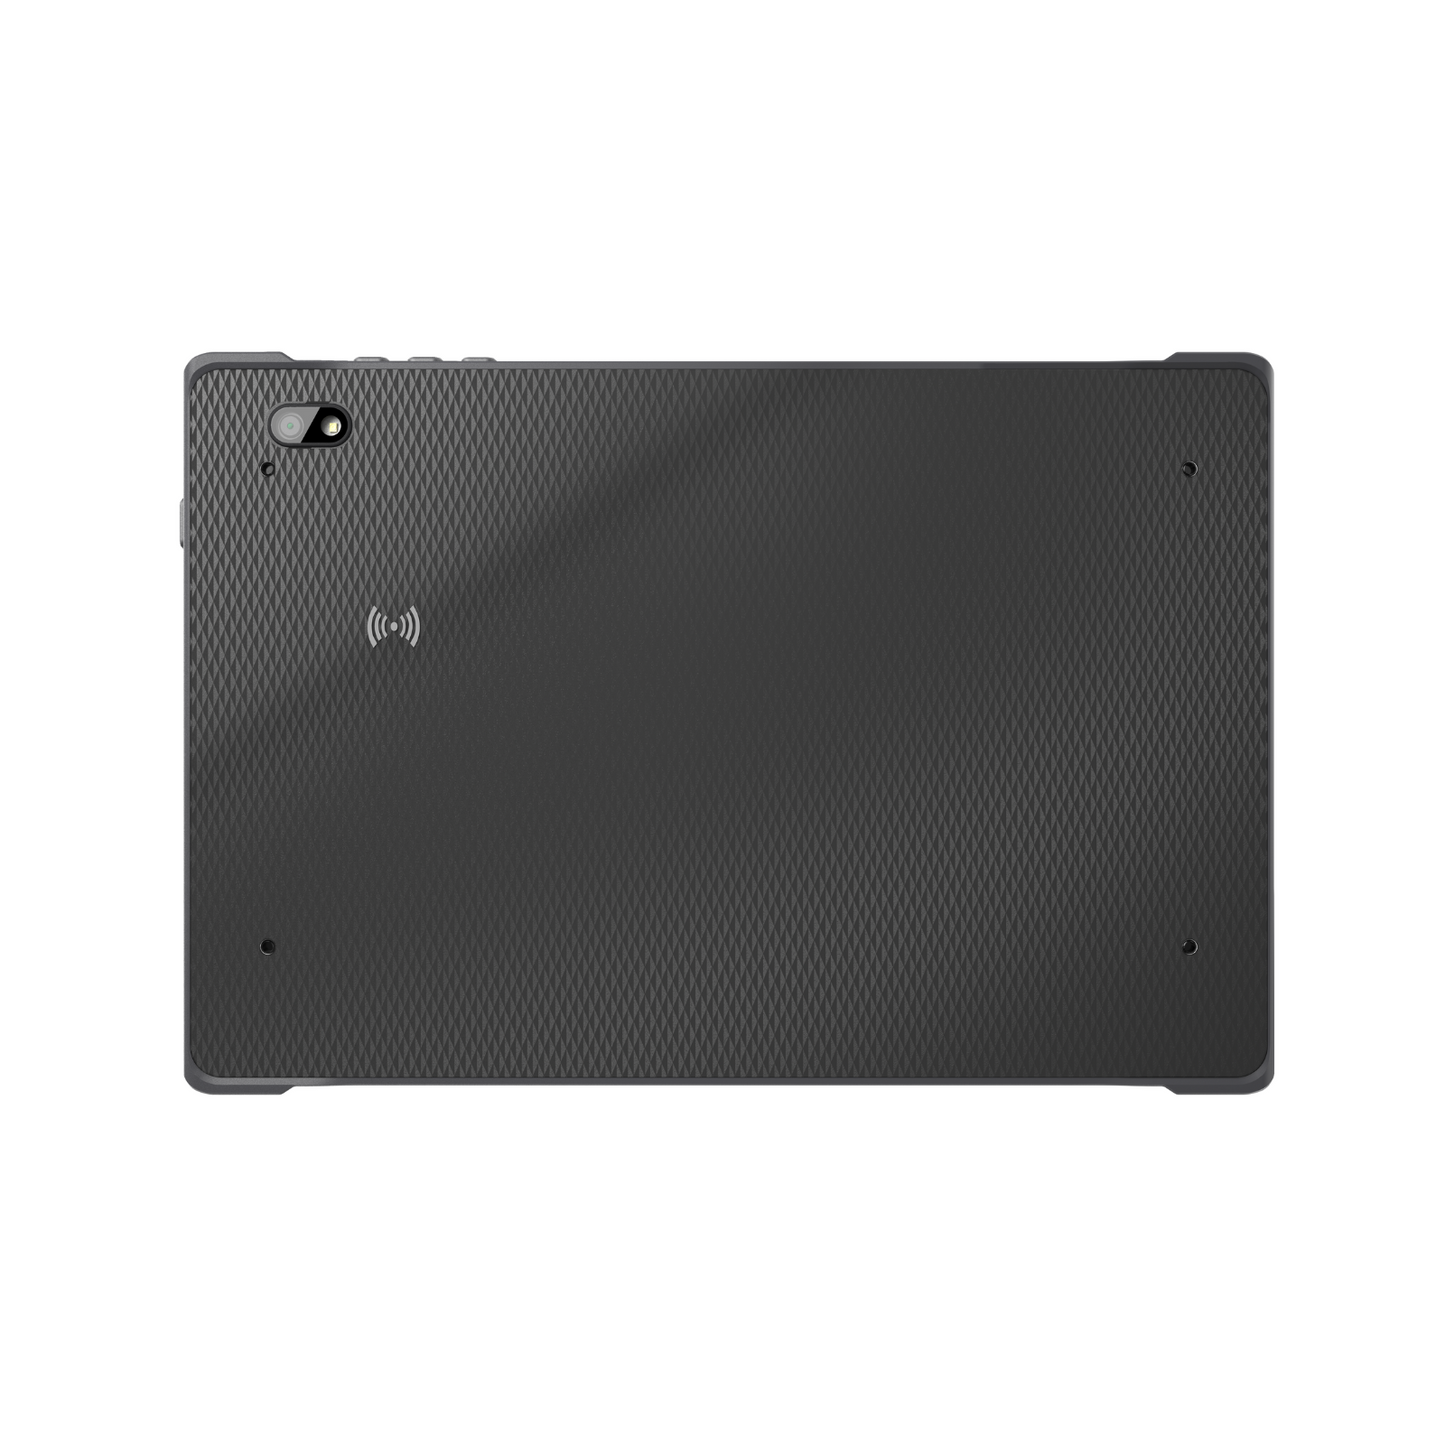 Rugged Tablet RT10